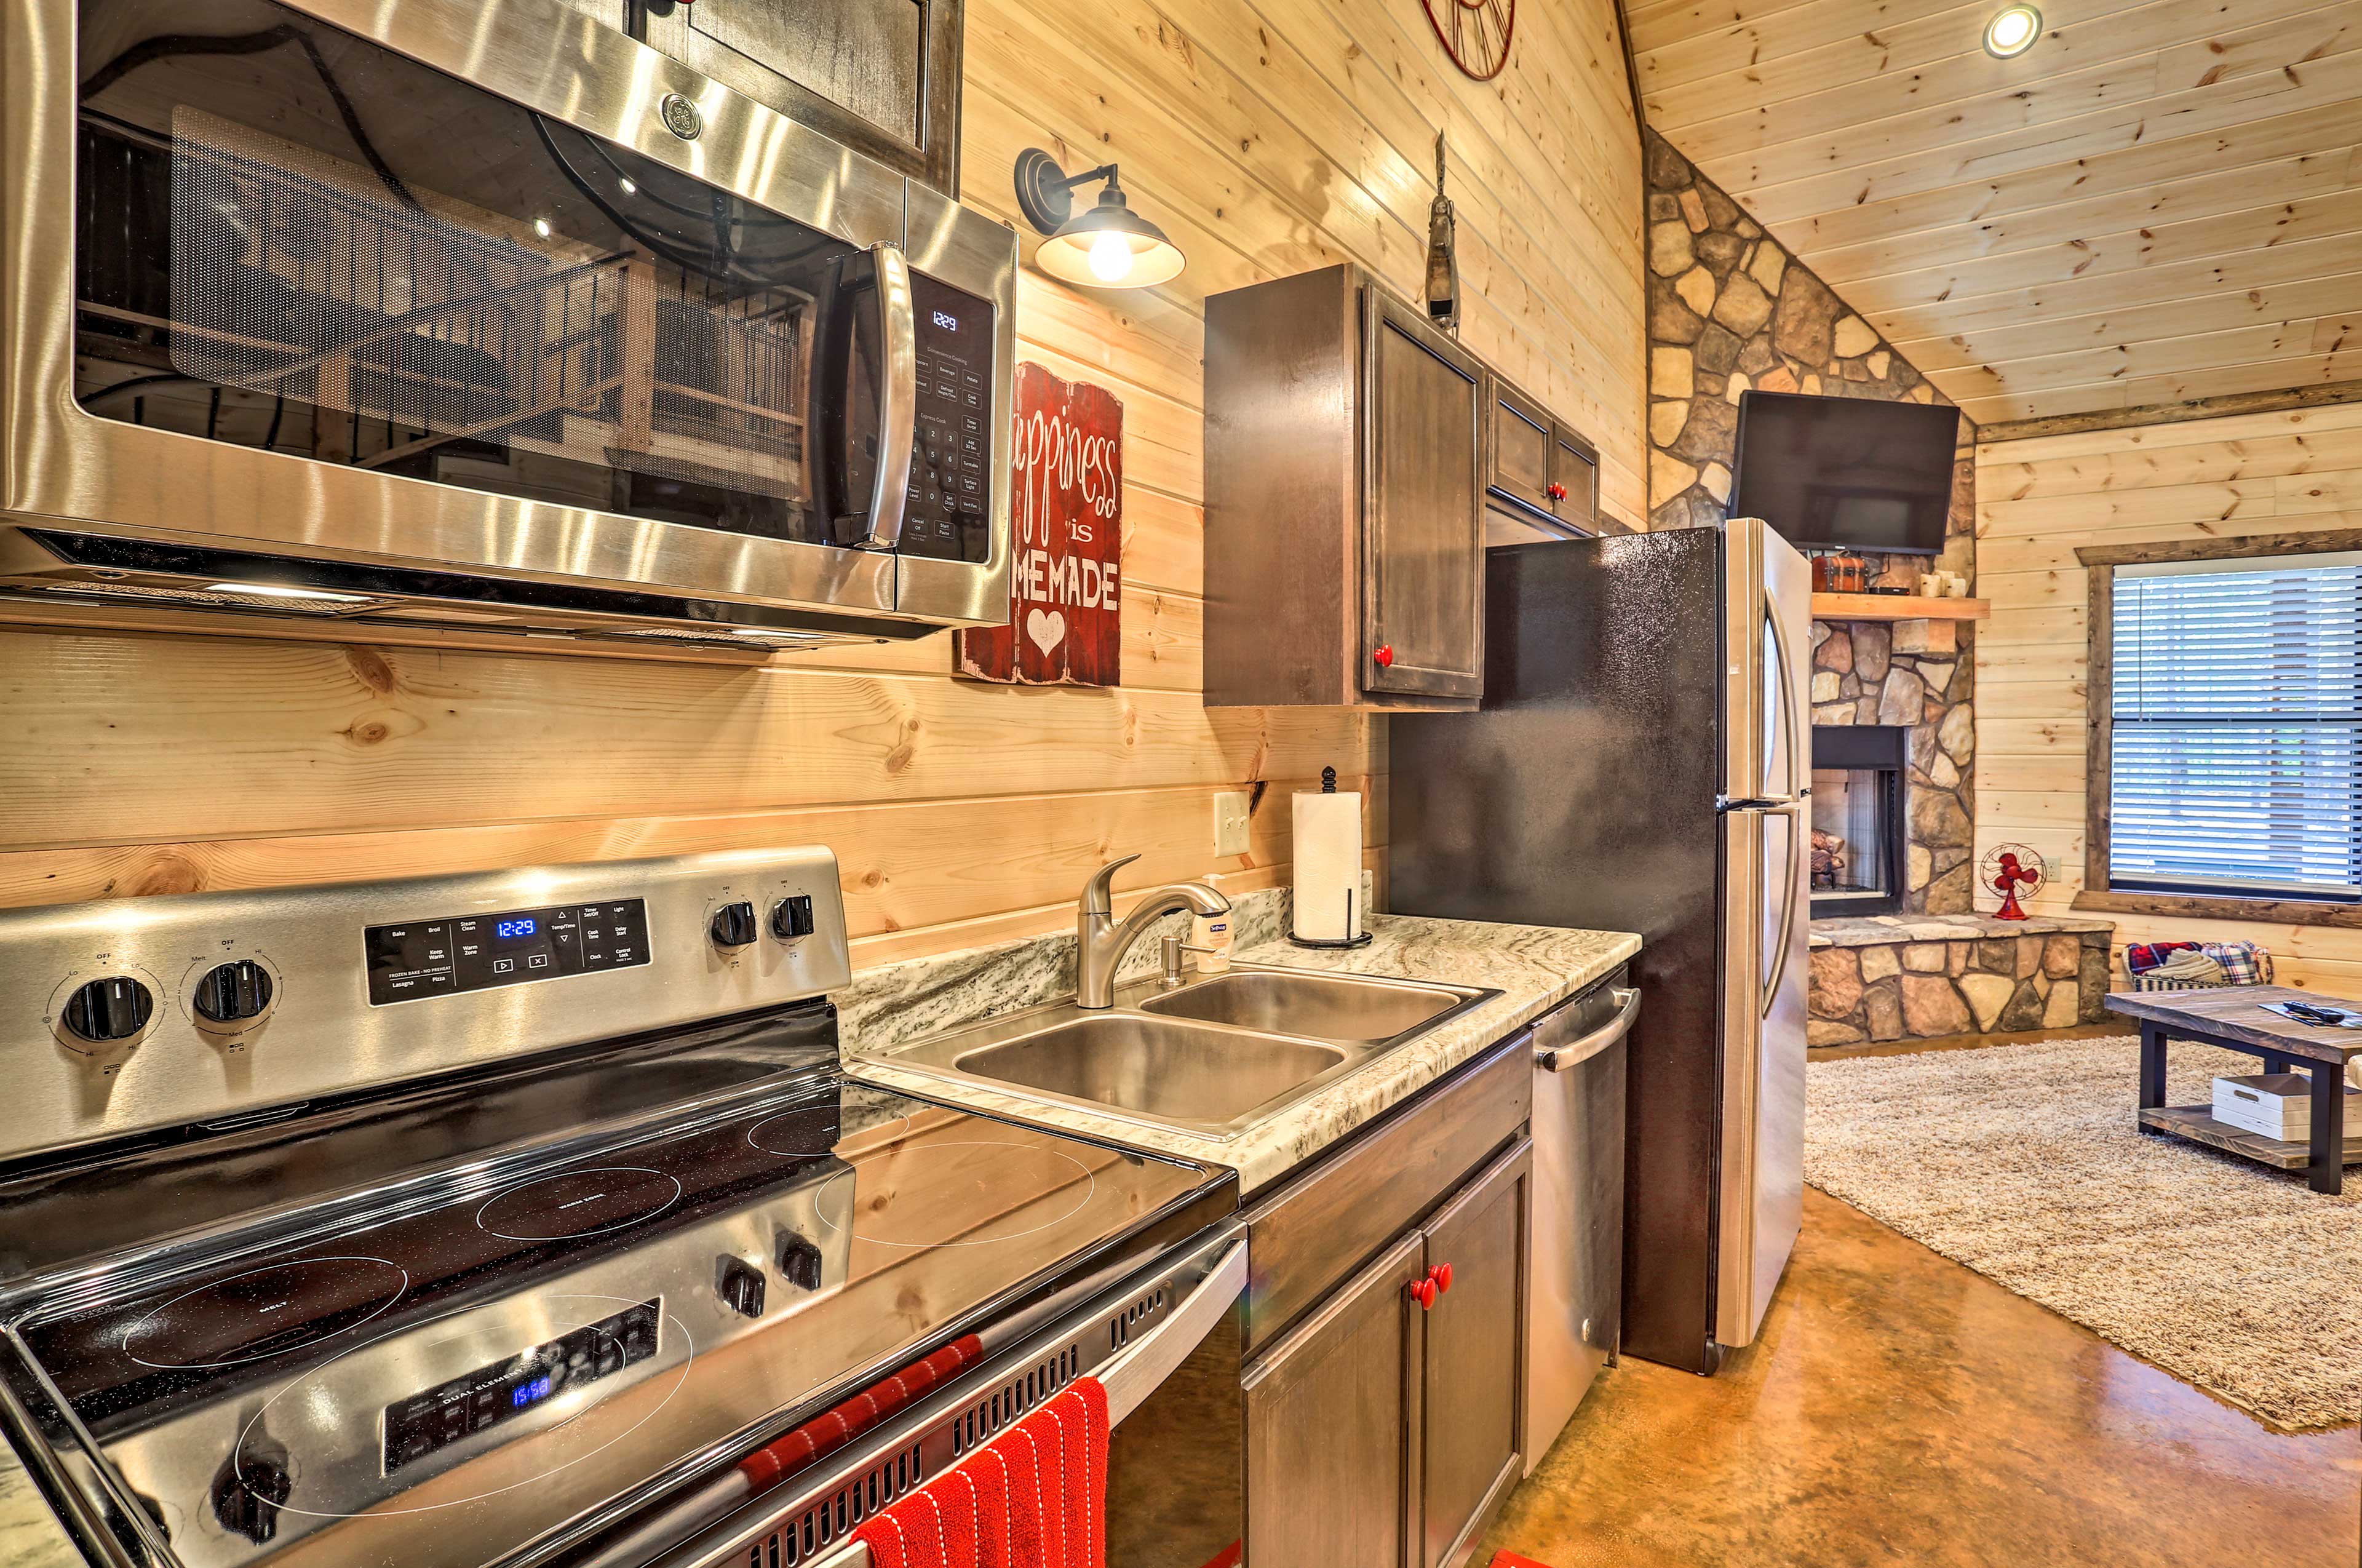 Stainless steel appliances complement the updated kitchen.